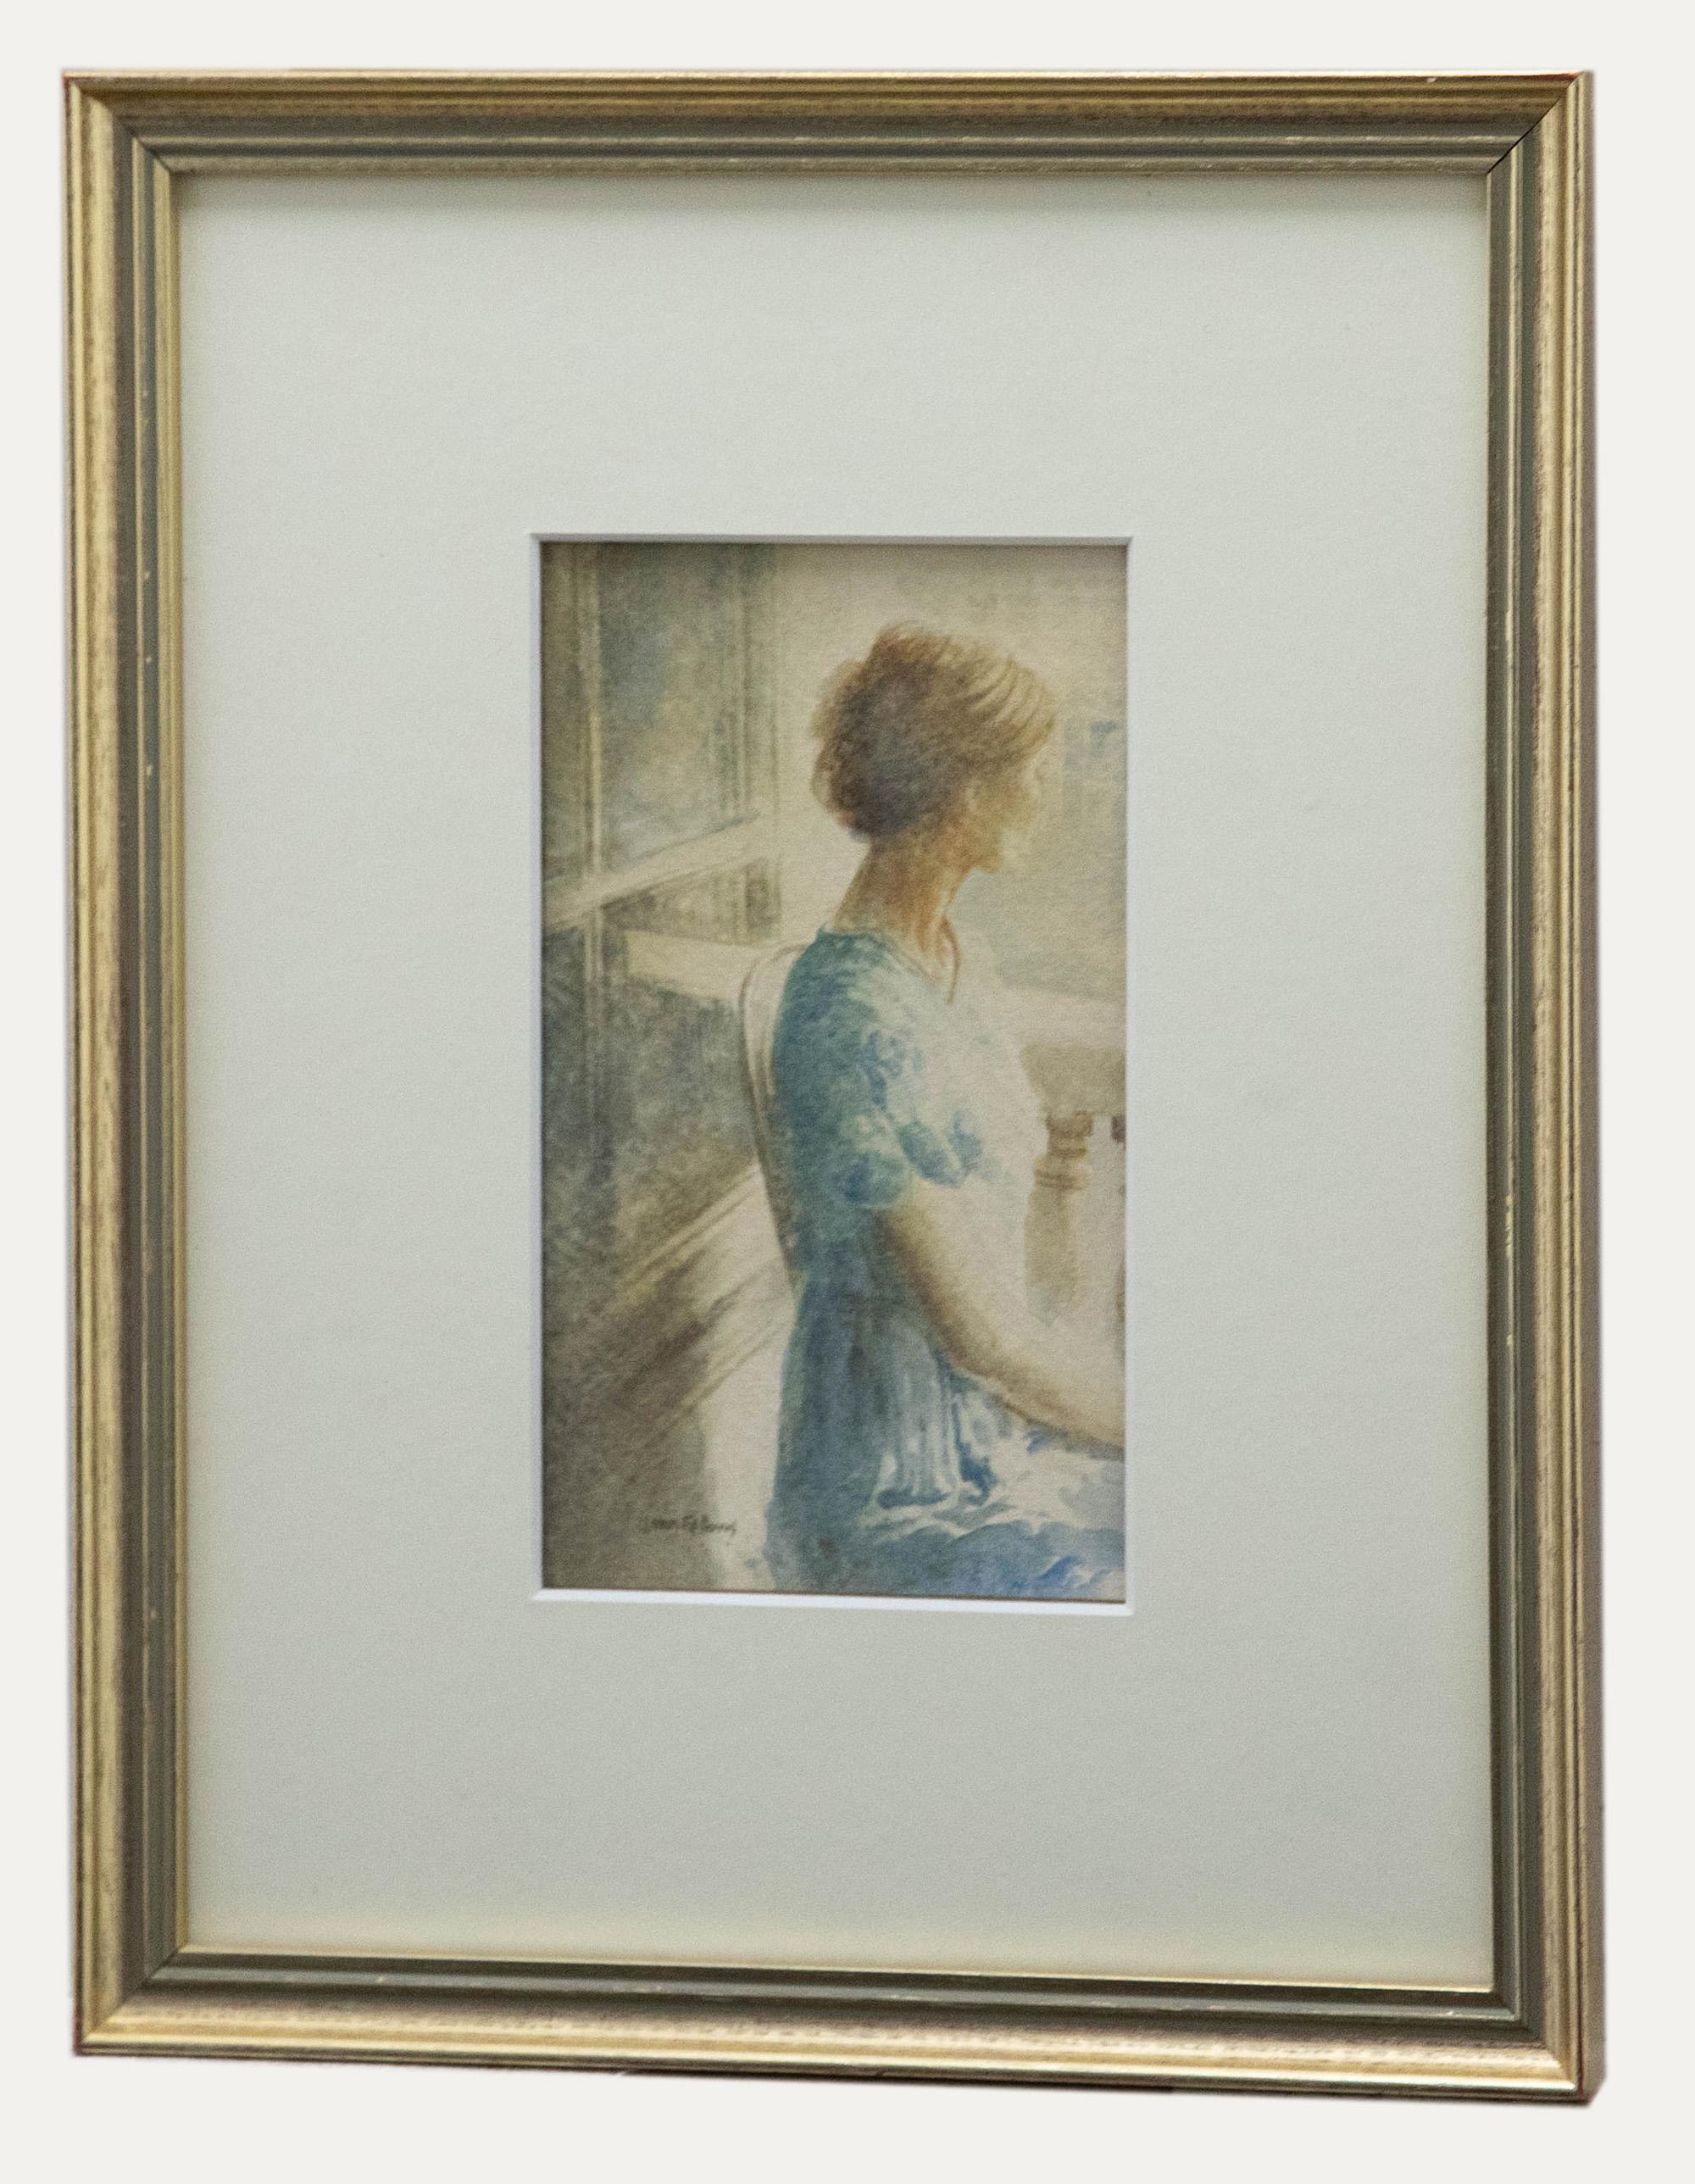 Unknown Portrait - John Fellows - Framed Early 20th Century Watercolour, Lady on the Balcony